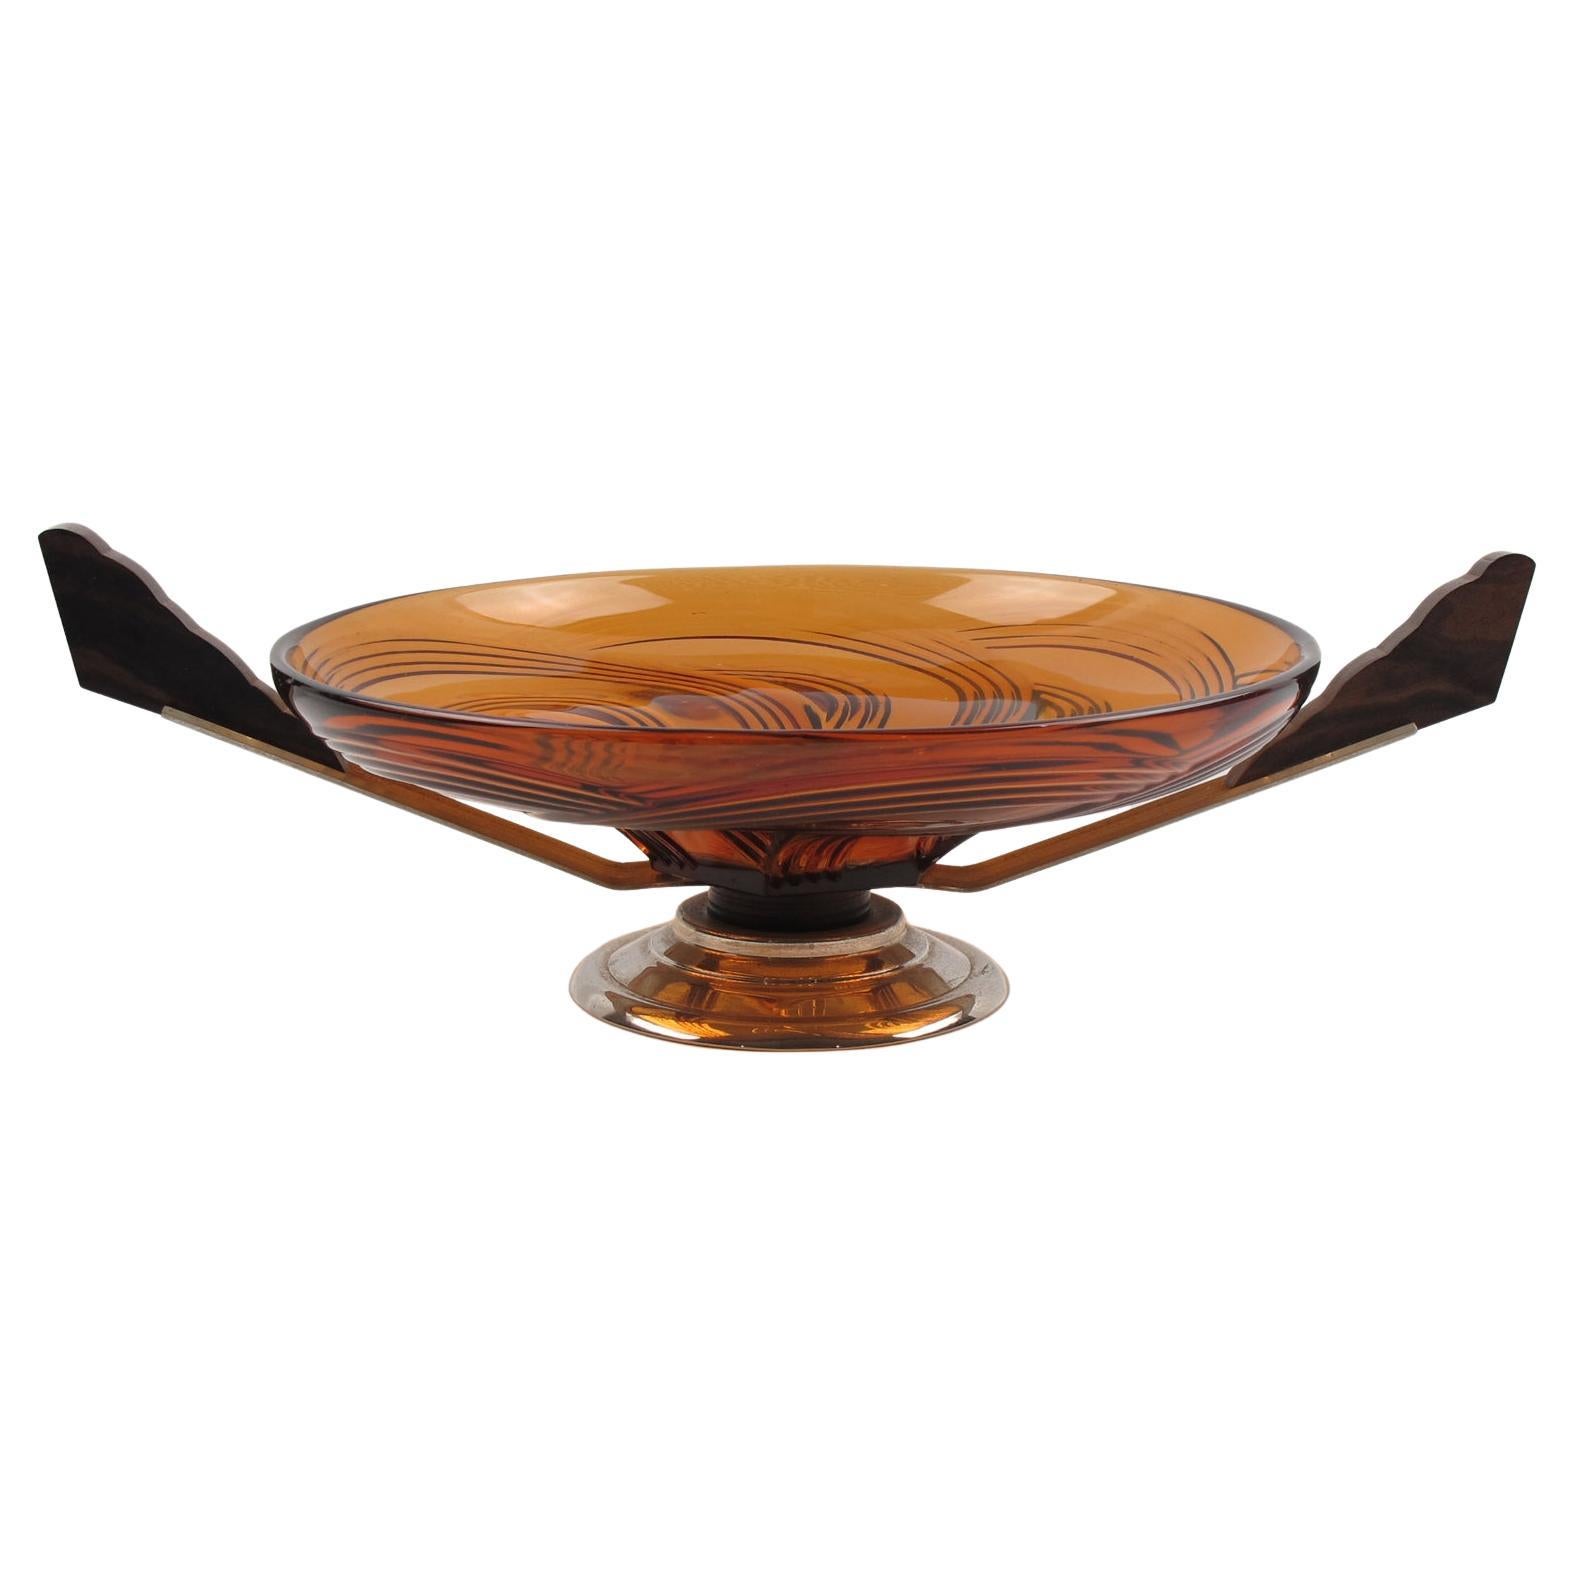 French Art Deco Macassar Wood and Glass Centerpiece Bowl